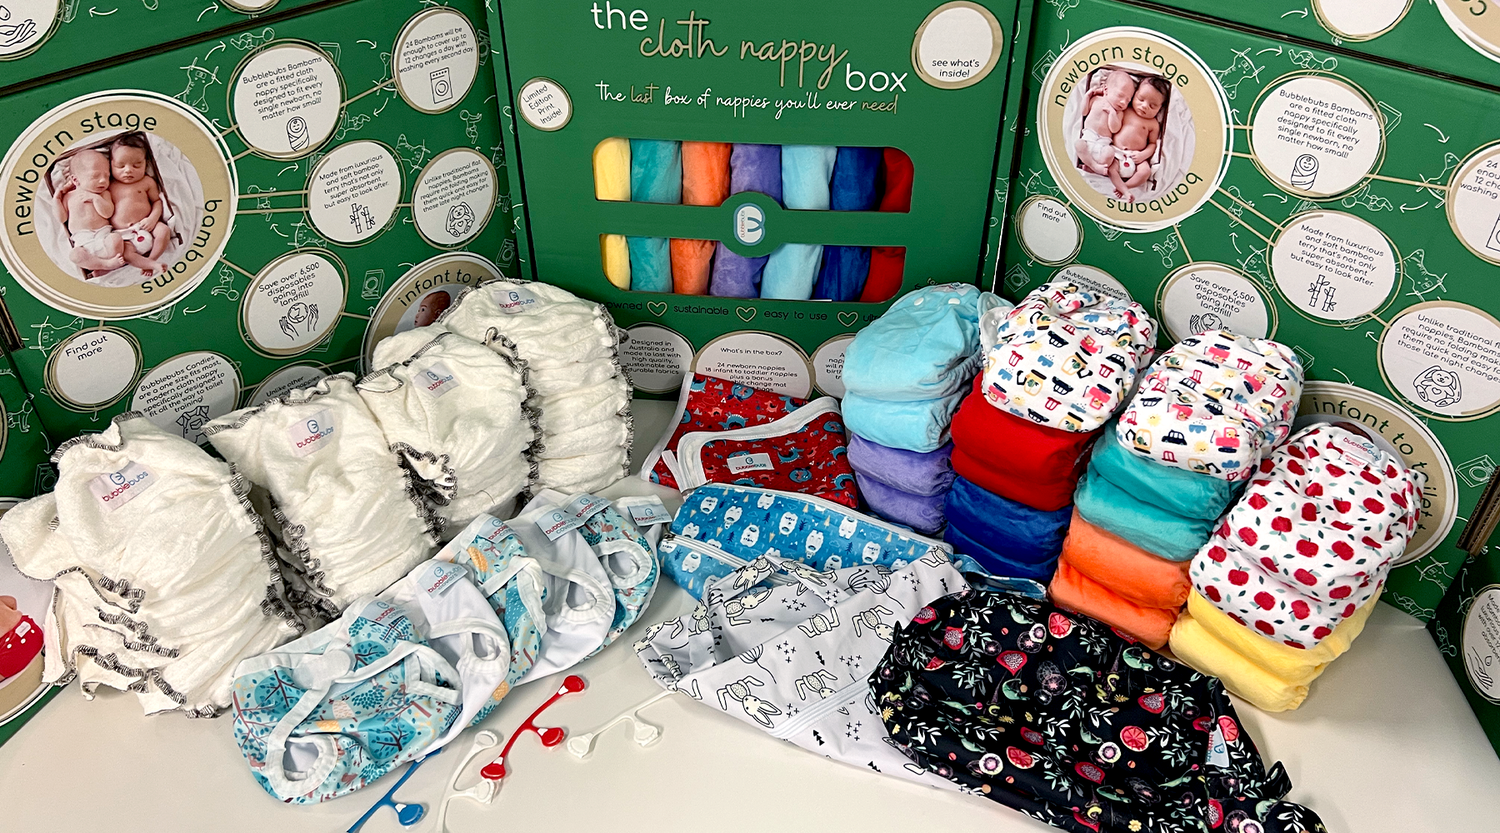 All the cloth nappies you need are in this one box. You will not need to buy more reusable diapers for not only your first child but up to 3. 